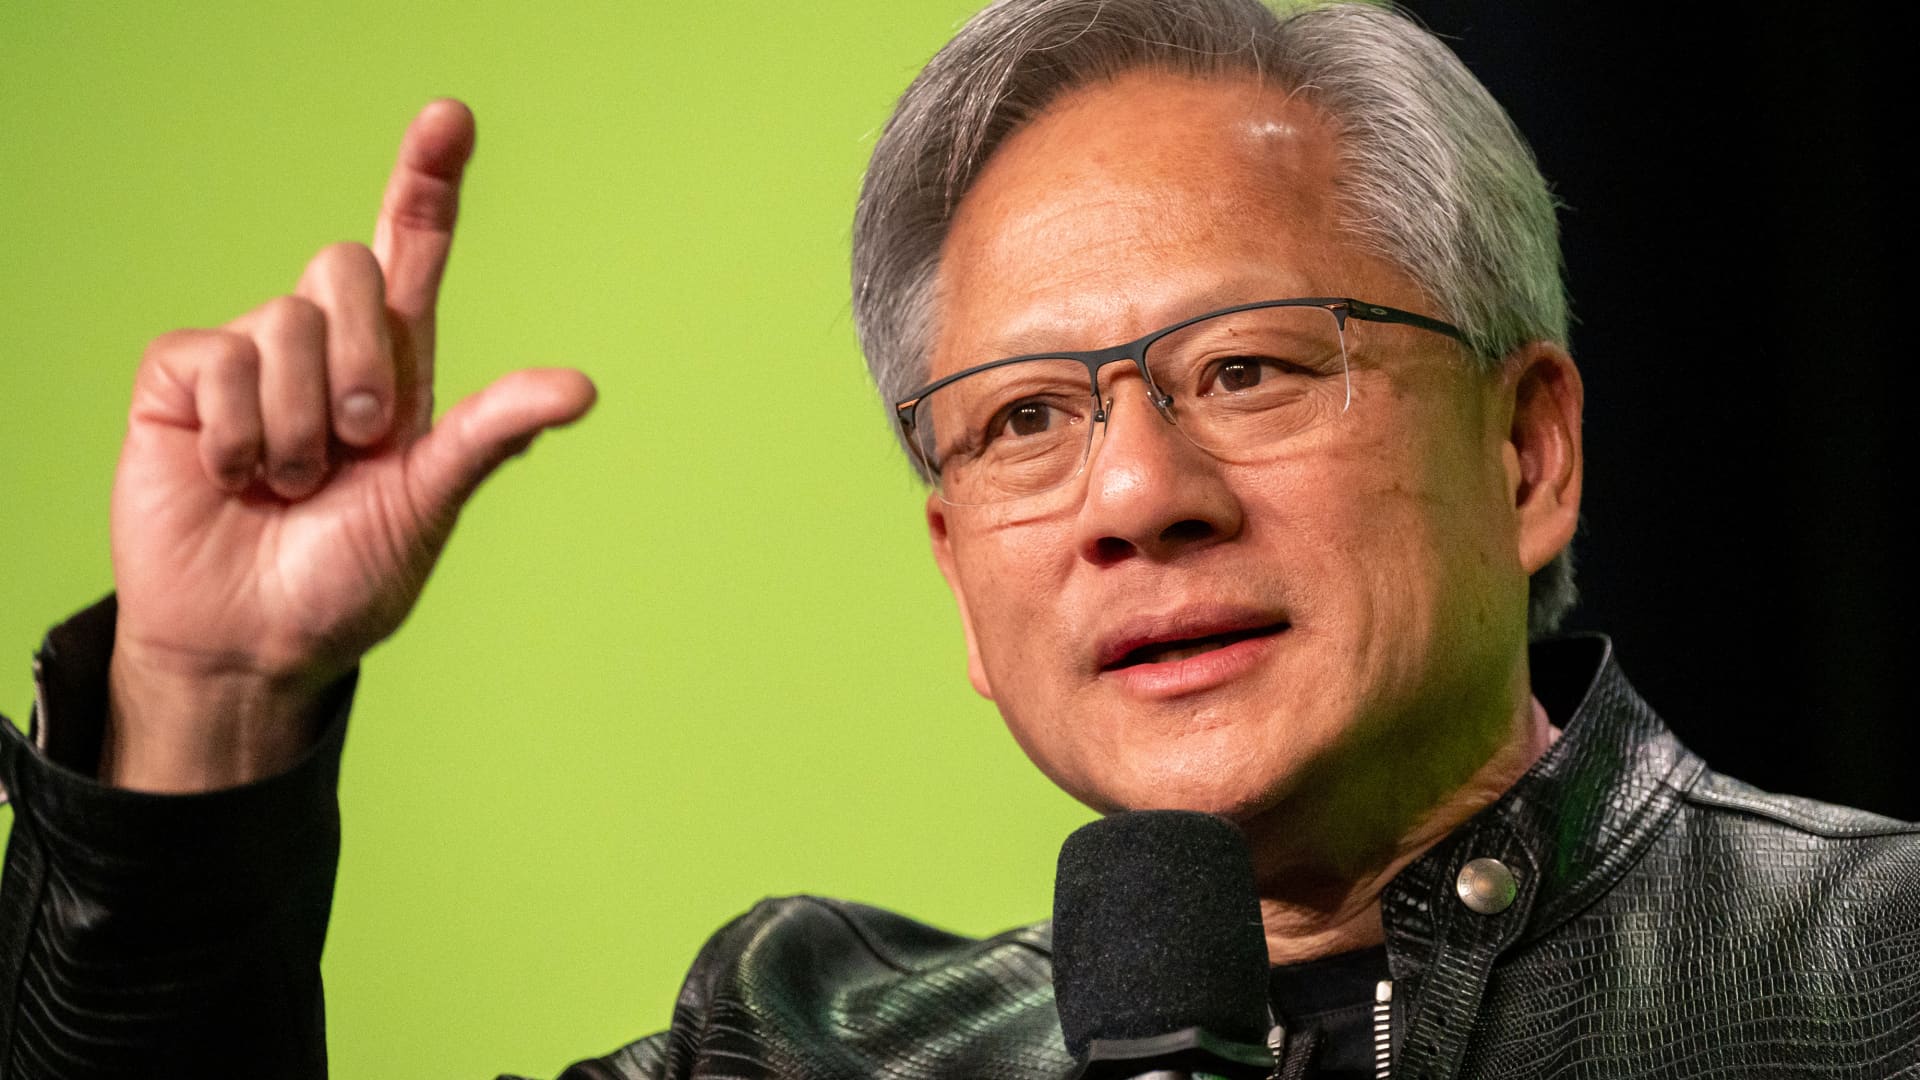 10 things to watch in the stock market on Tuesday, including Nvidia price target increases